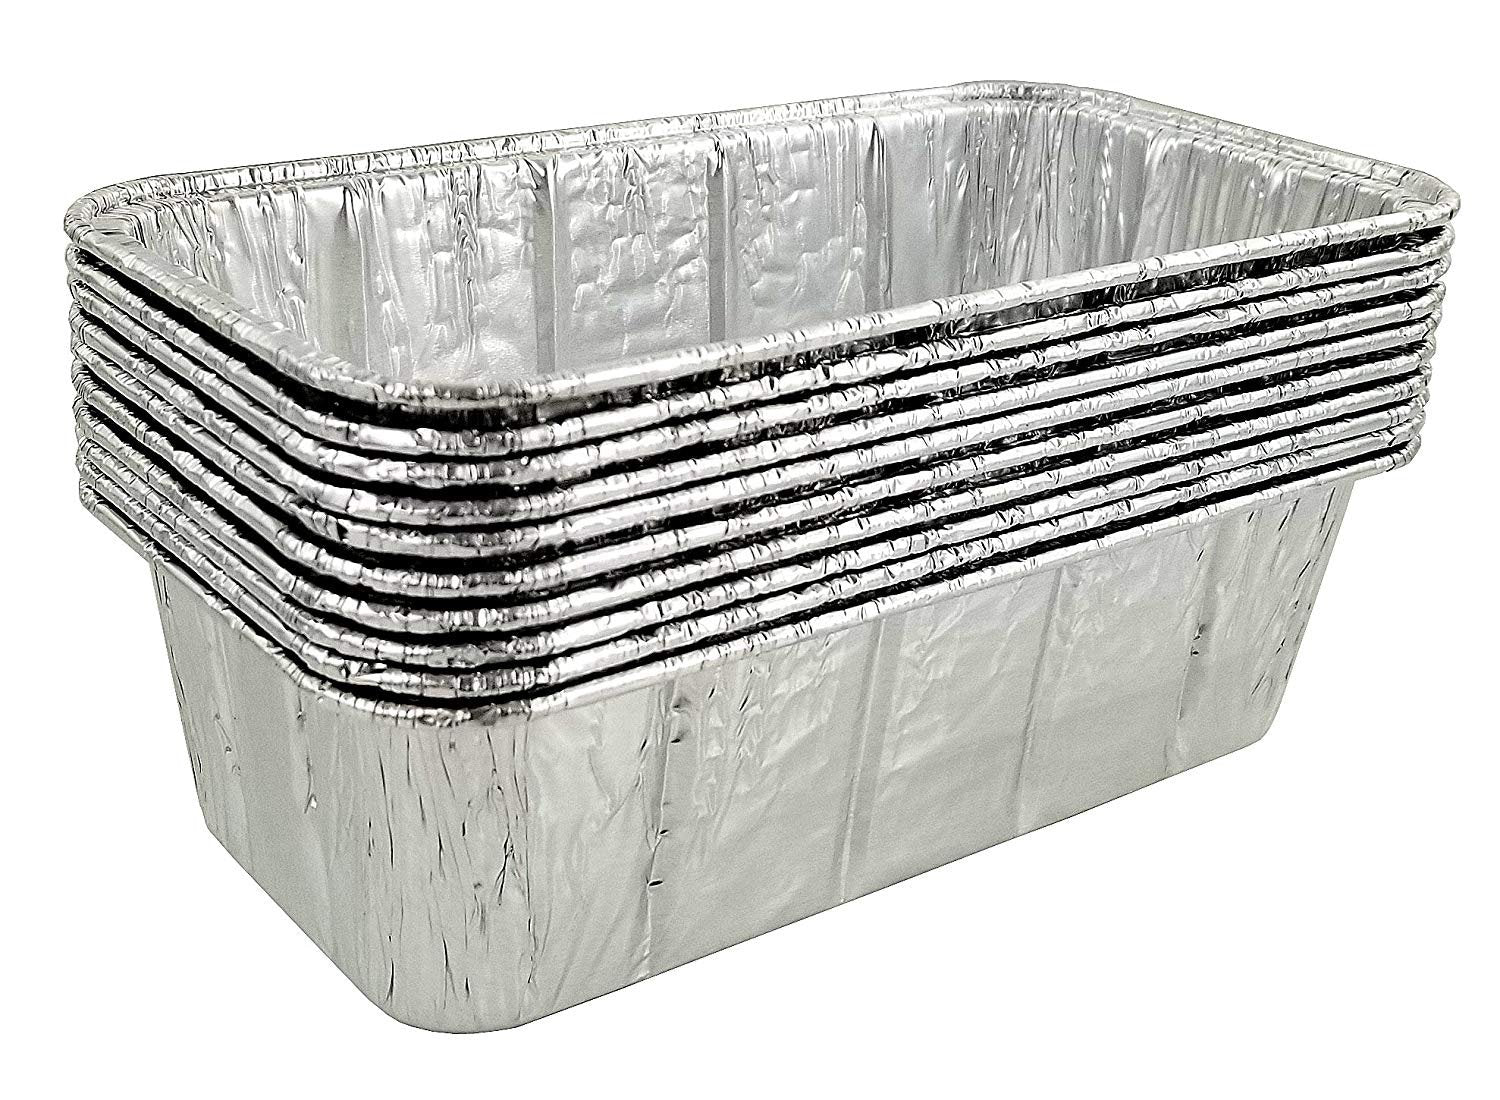 1½ lb. Foil Loaf Pan with Clear Dome Lid - #208P